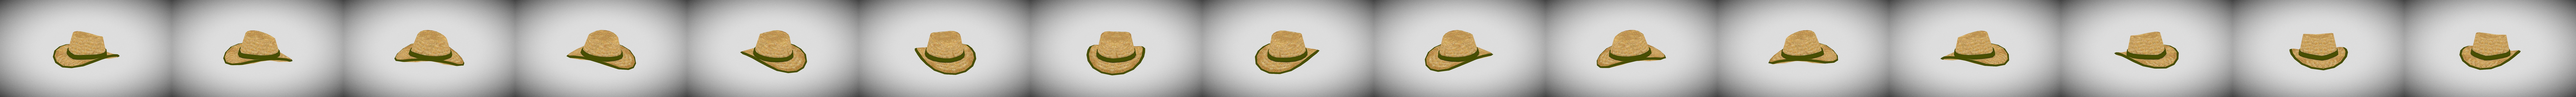 Straw Hat For Roblox Game Buy Royalty Free 3d Model By Catafest Catafest 14ccdf3 Sketchfab Store - roblox hat straw